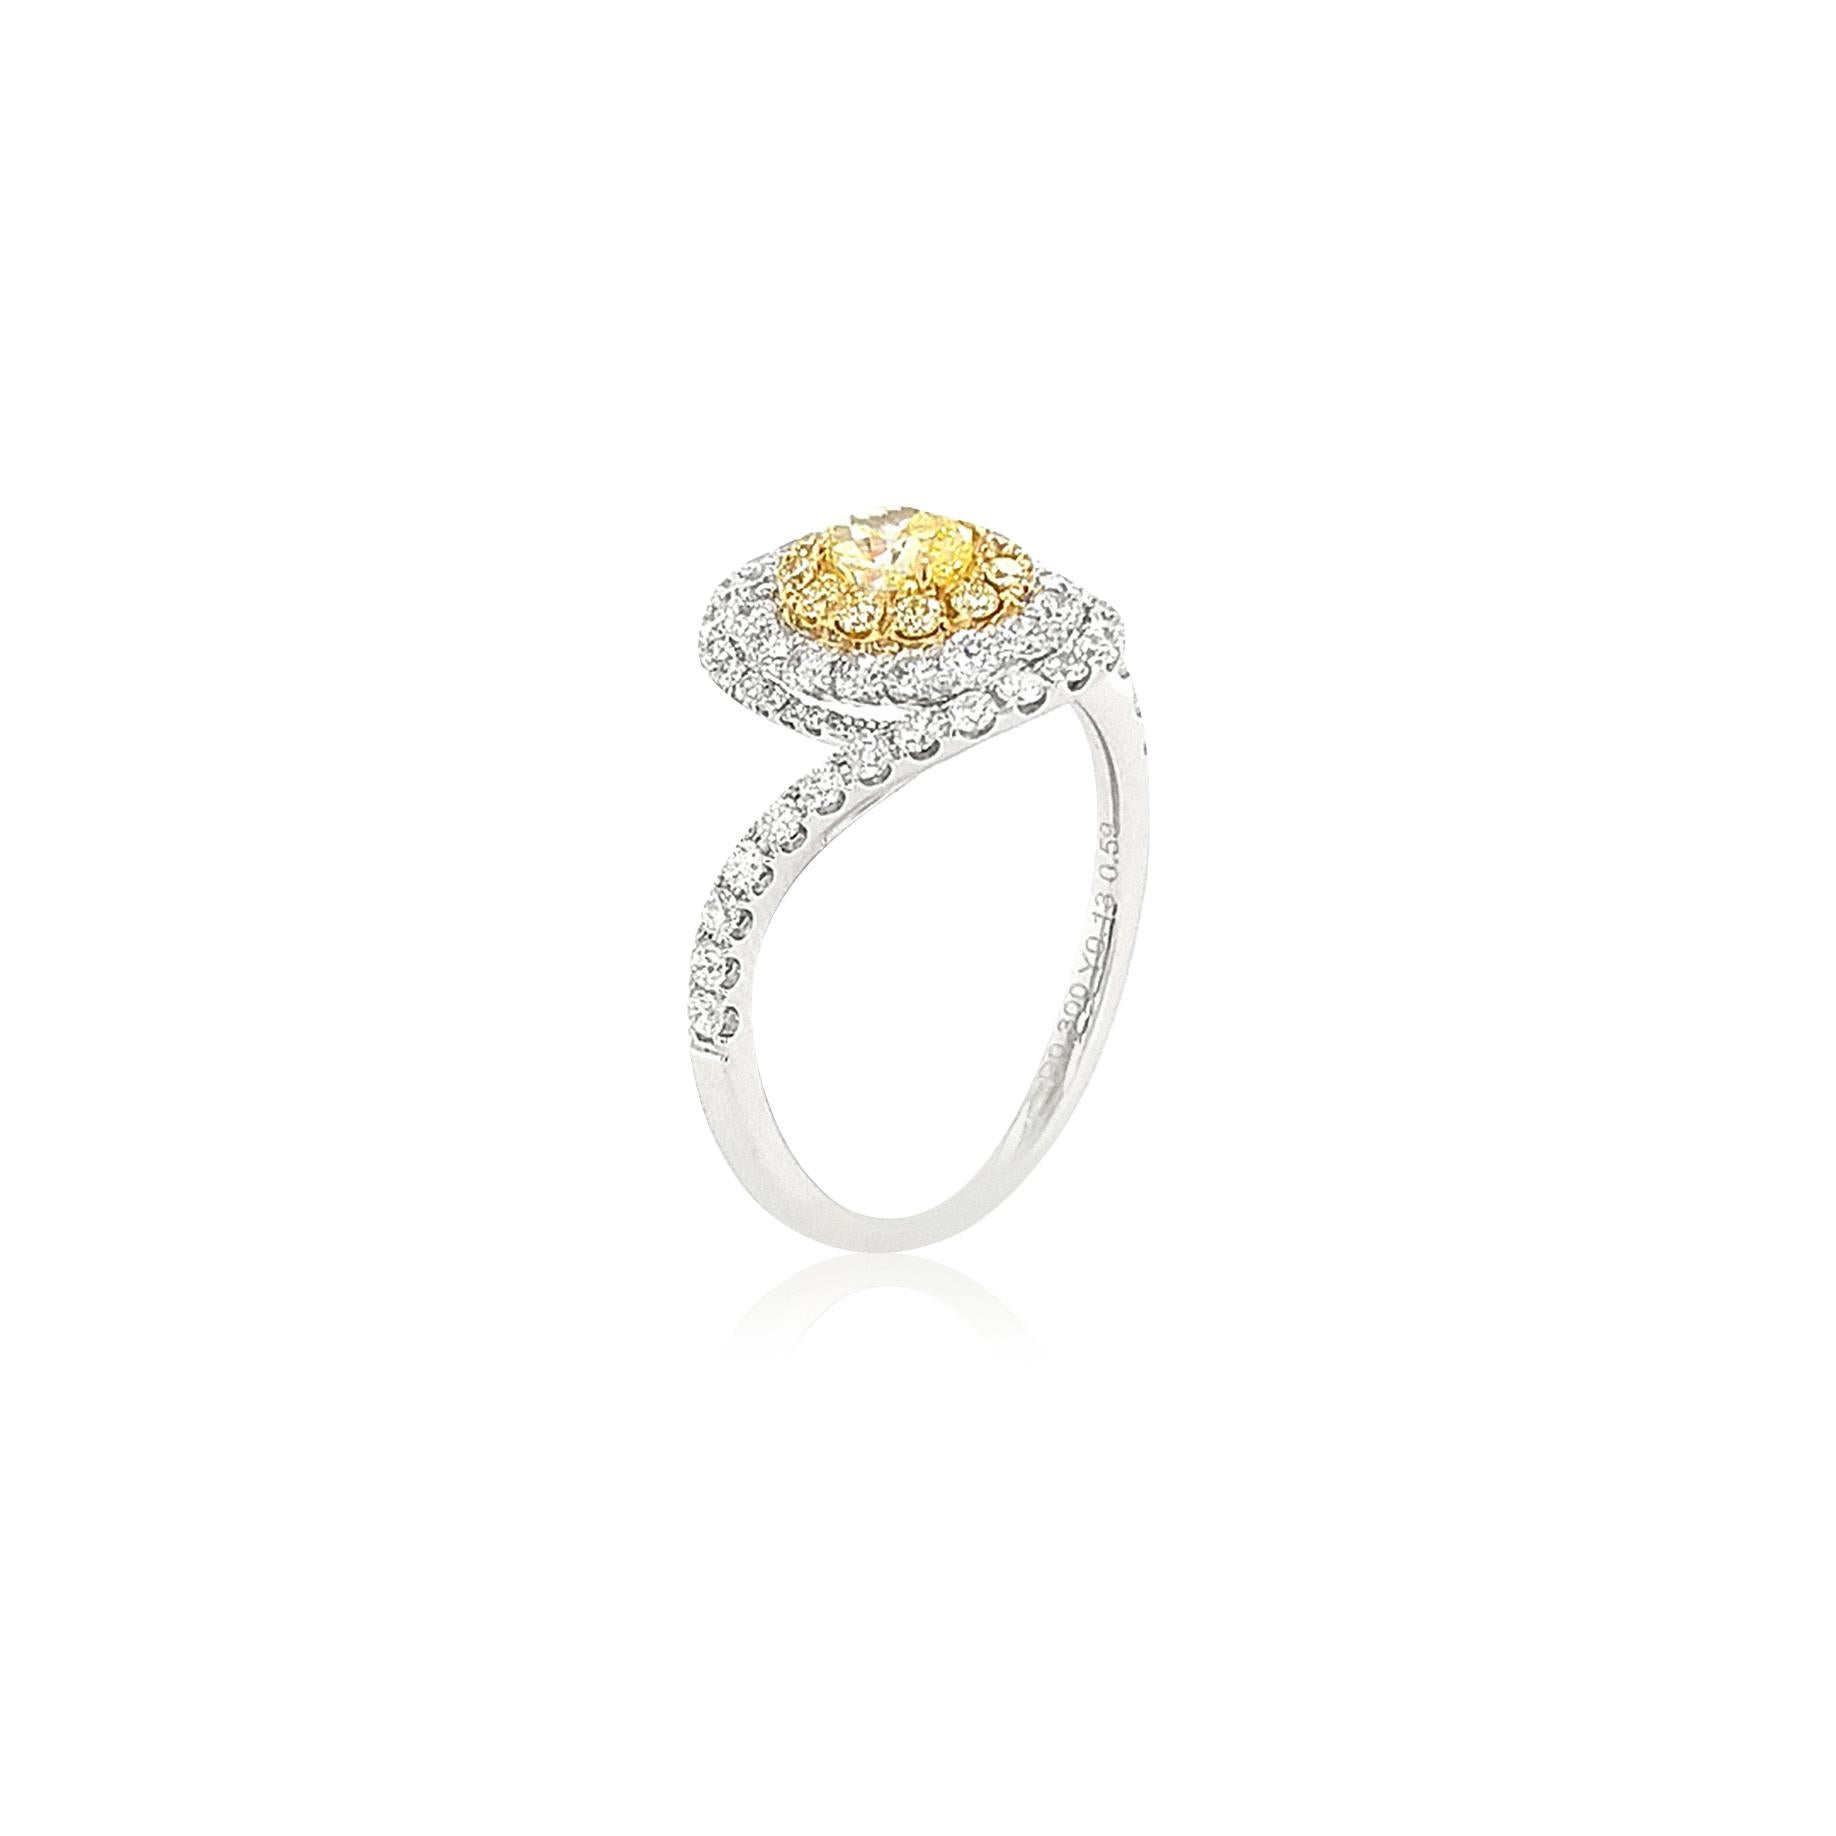 Oval Cut Certified Fancy Yellow Diamond and White Diamond in Platinum Wedding Ring